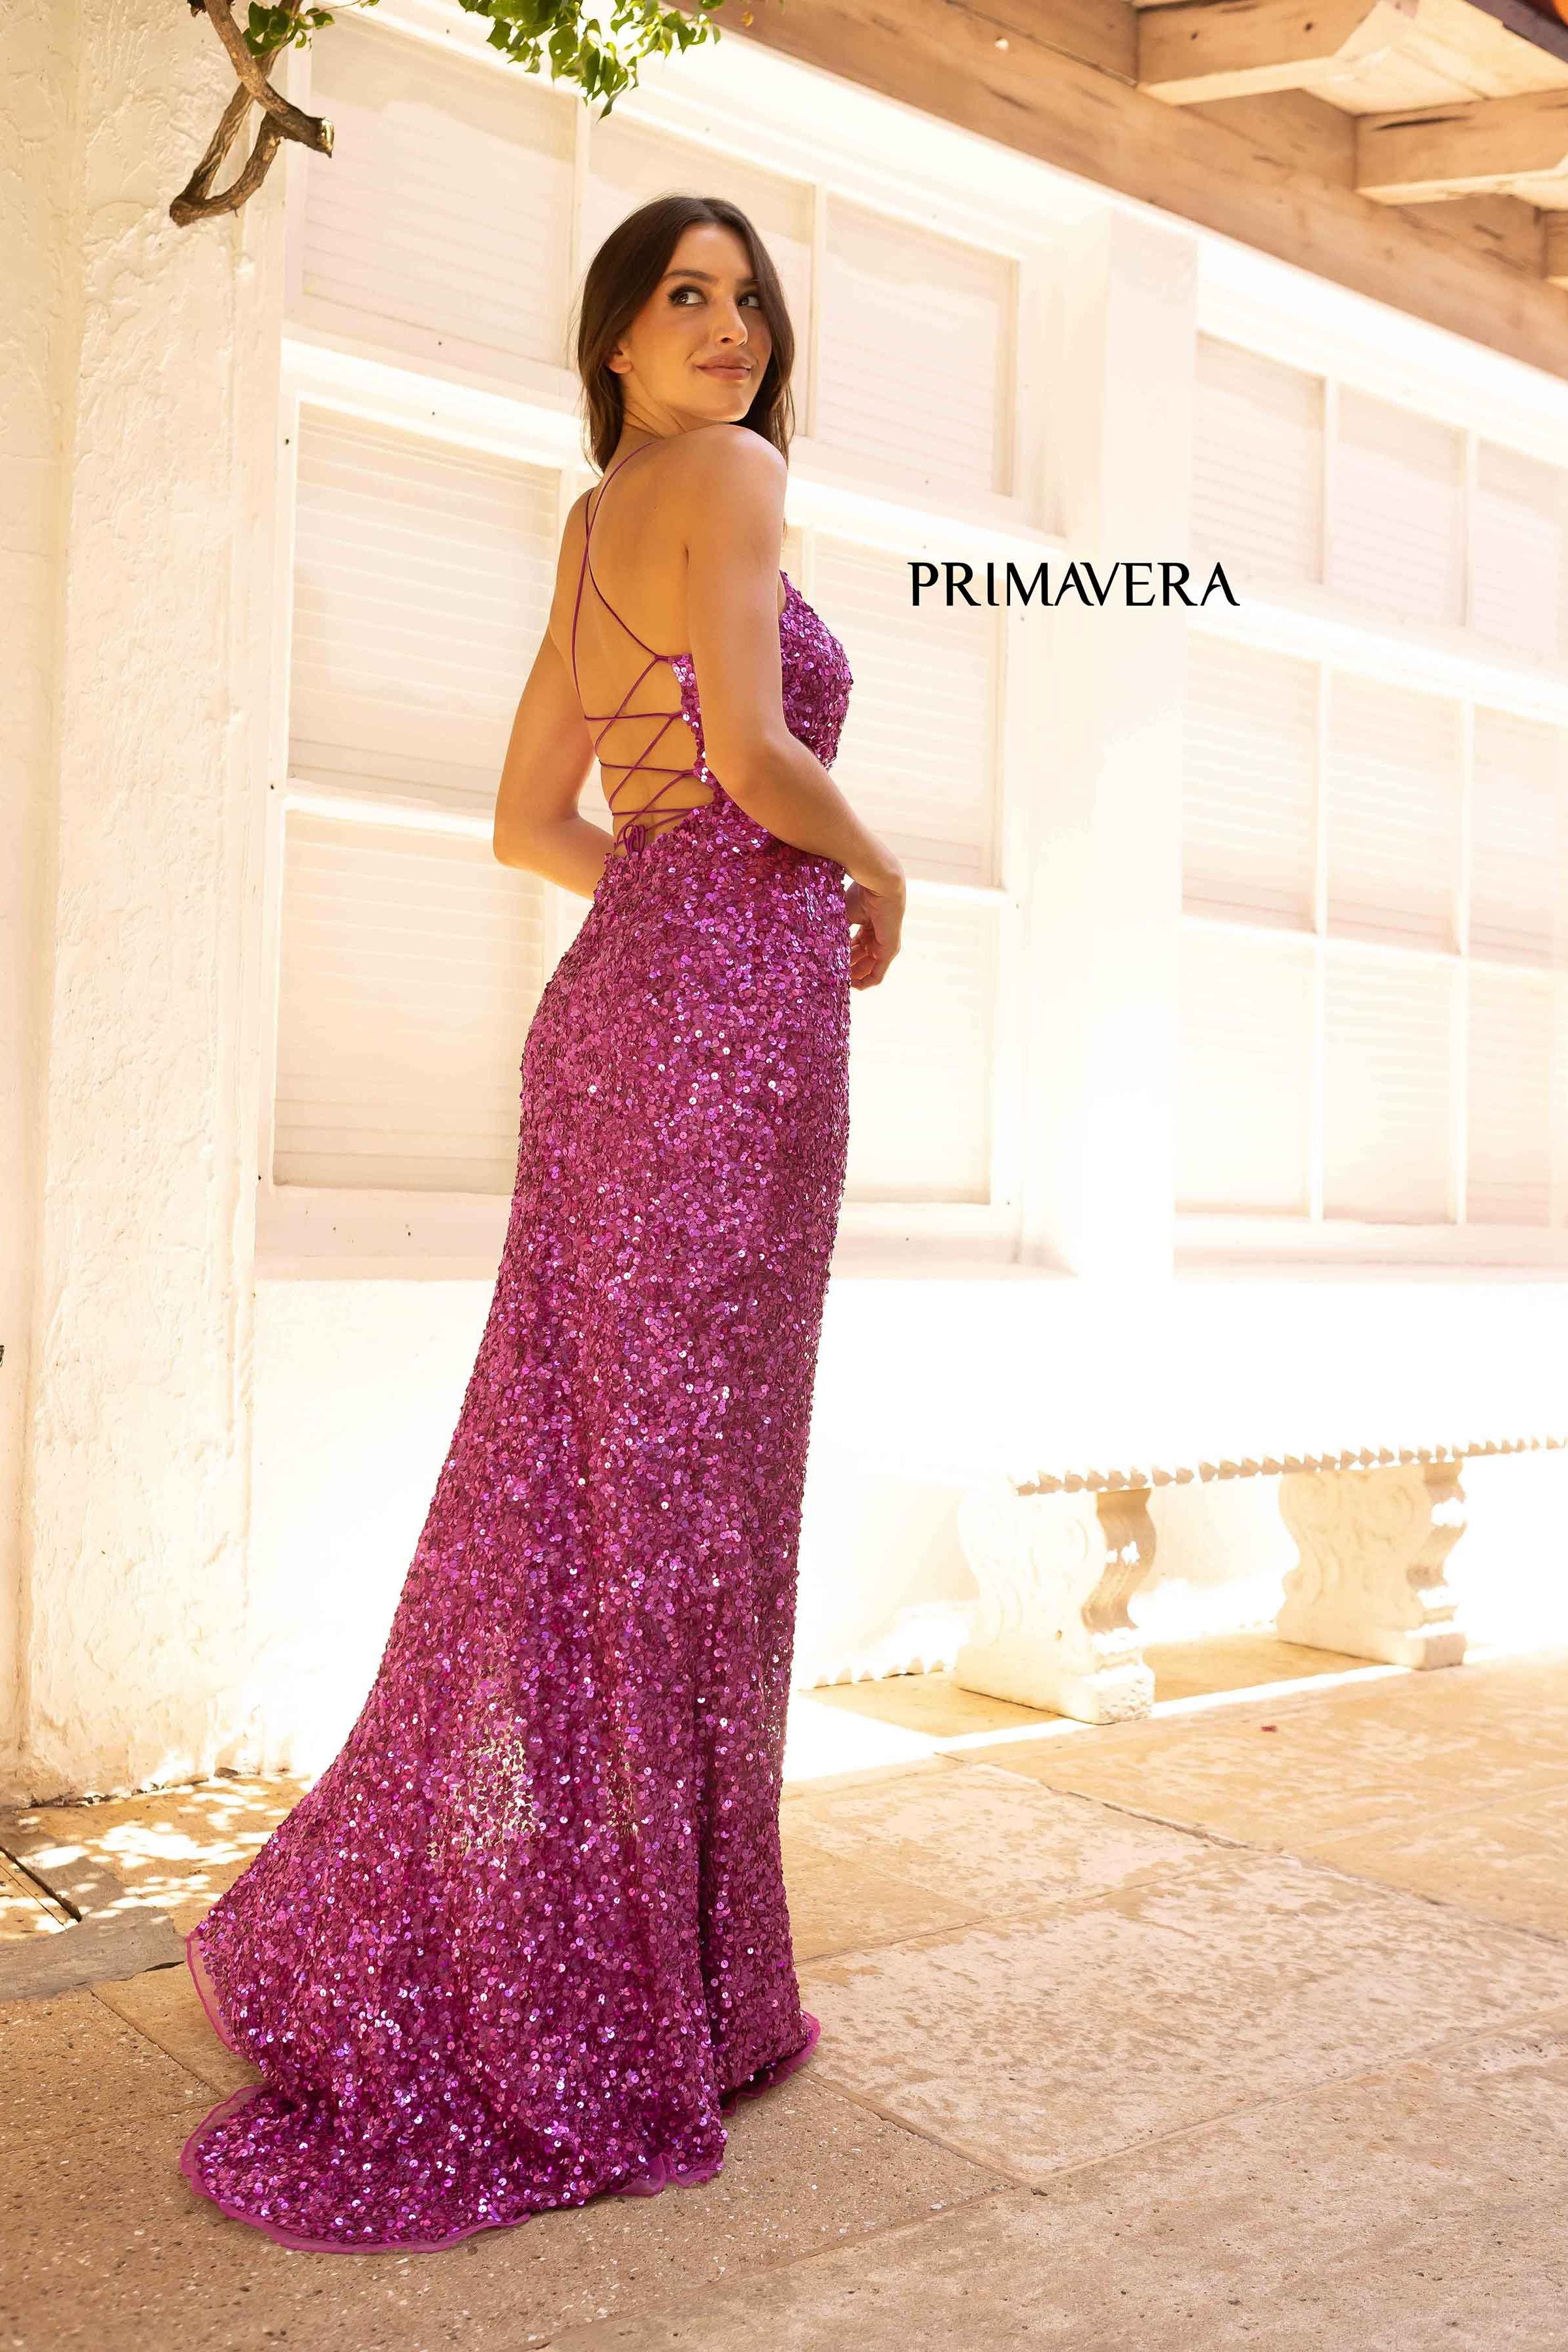 Scoop Neckline With Beaded Silhouette 01 By Primavera Couture -3290